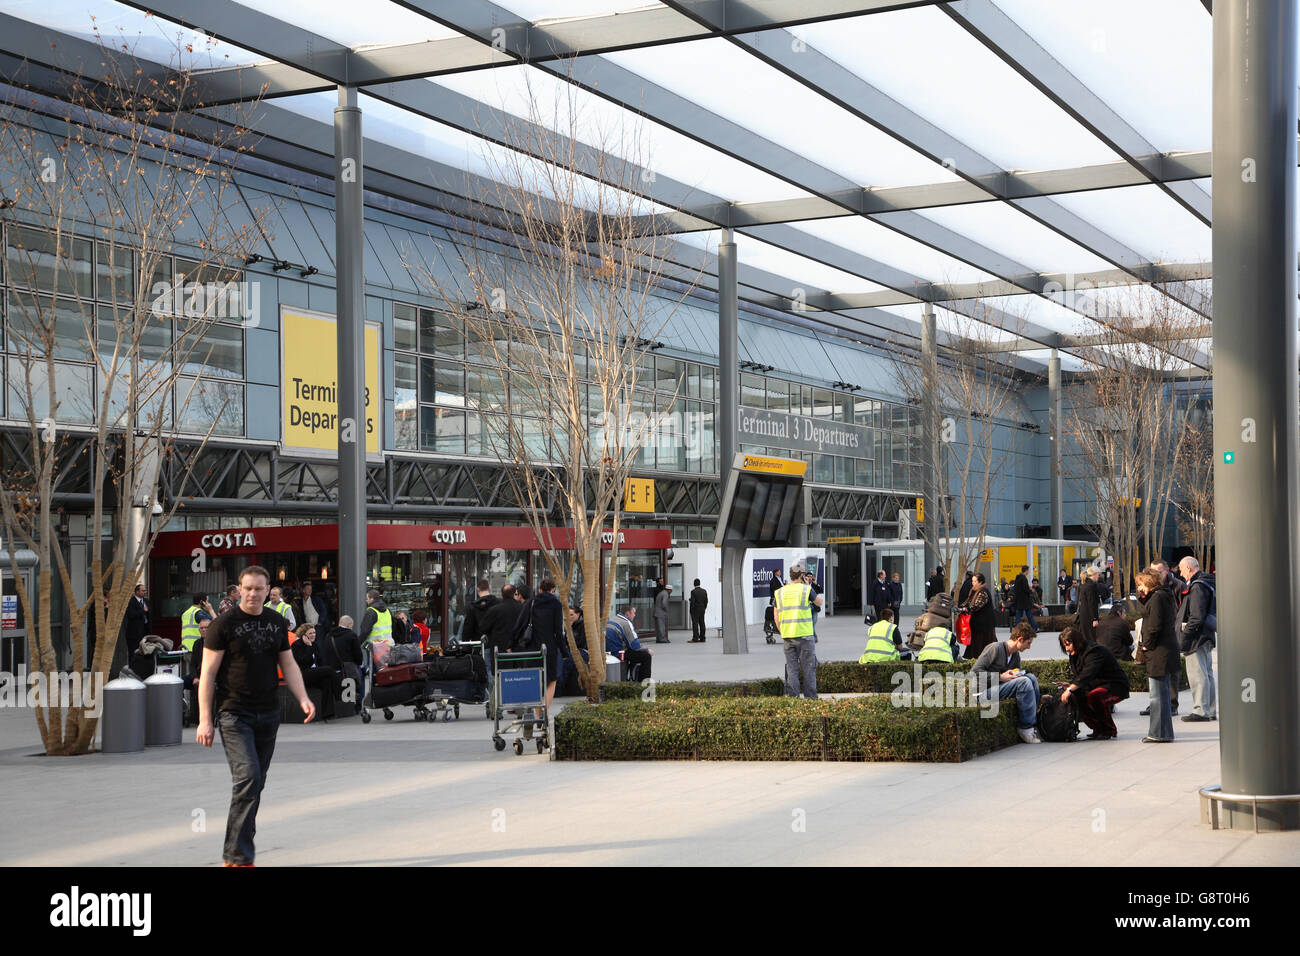 Landside entrance to London Heathrow Airport Terminal 3 Departures hall. Shows external area busy with passengers and staff Stock Photo